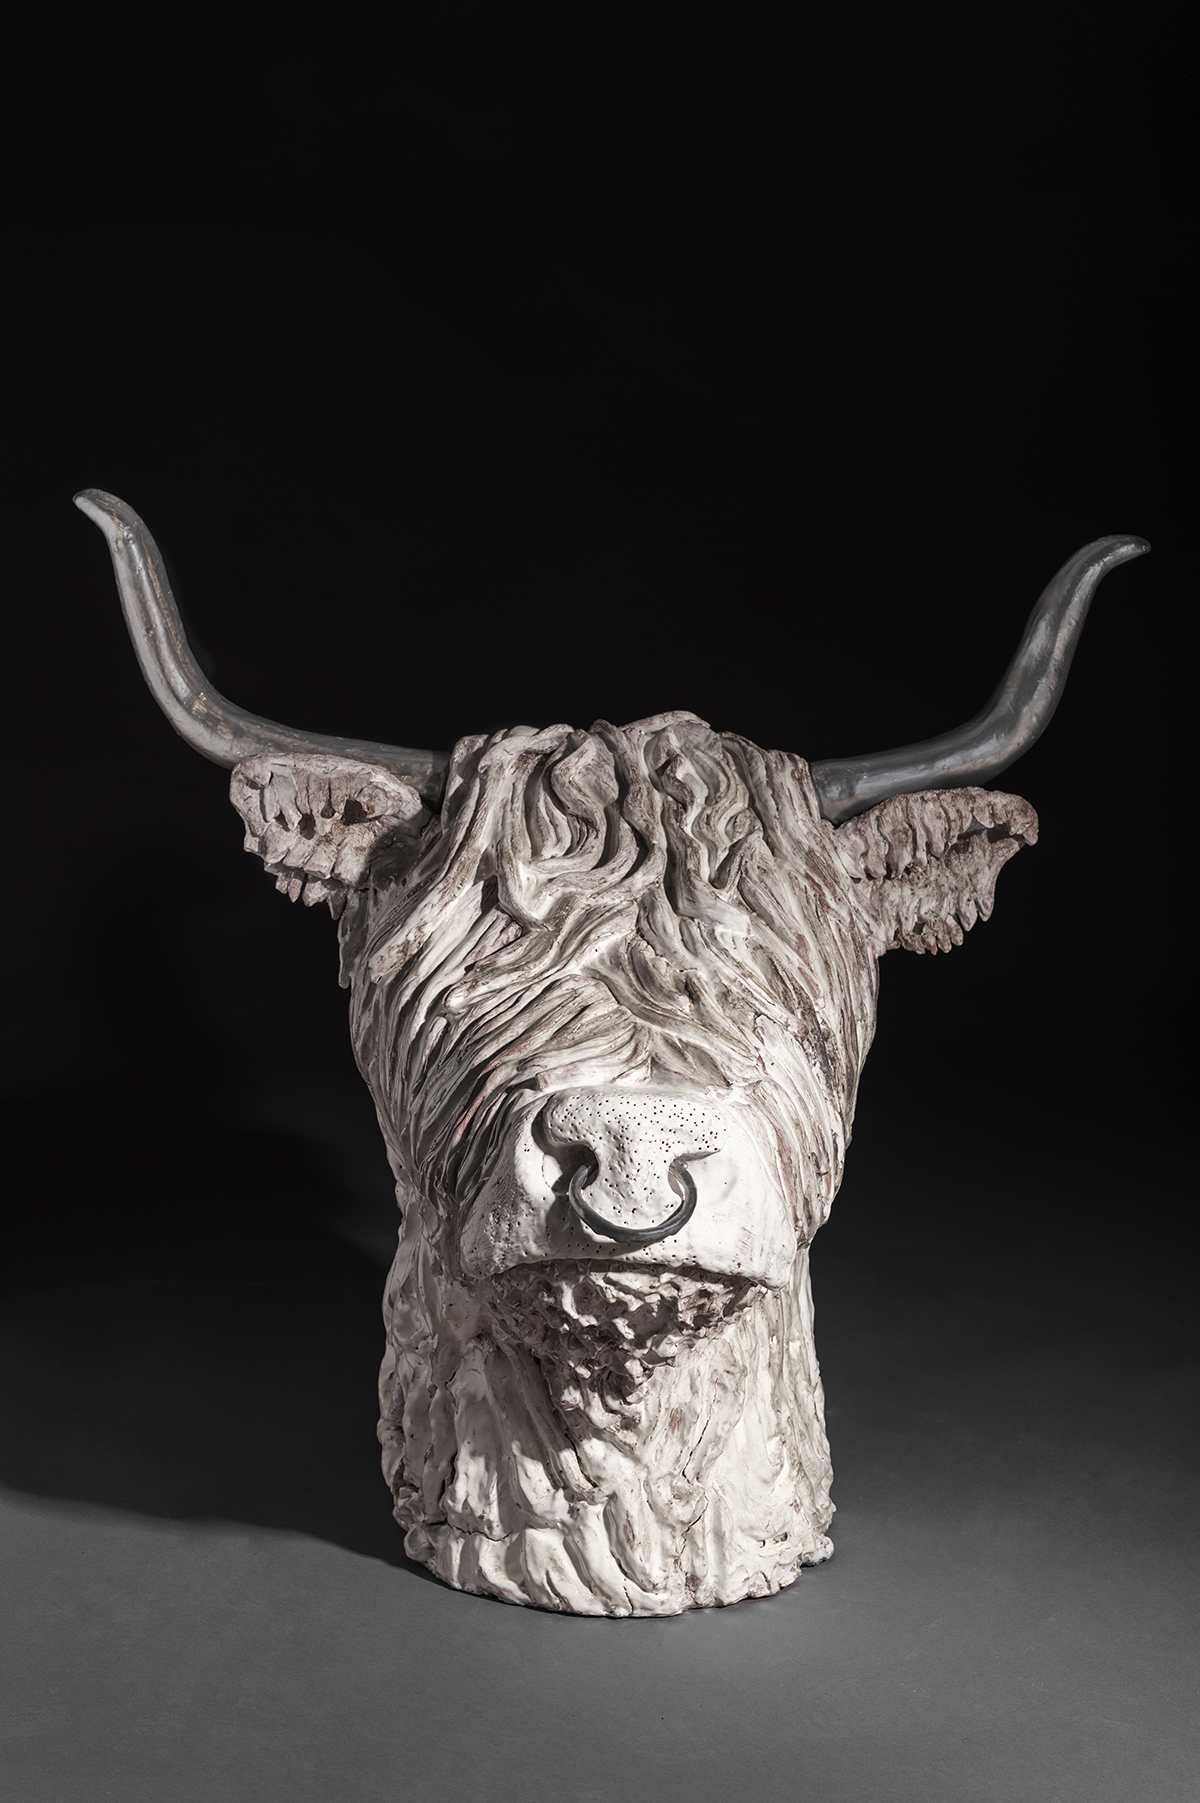 A ceramic sculpture of a bull with horns.